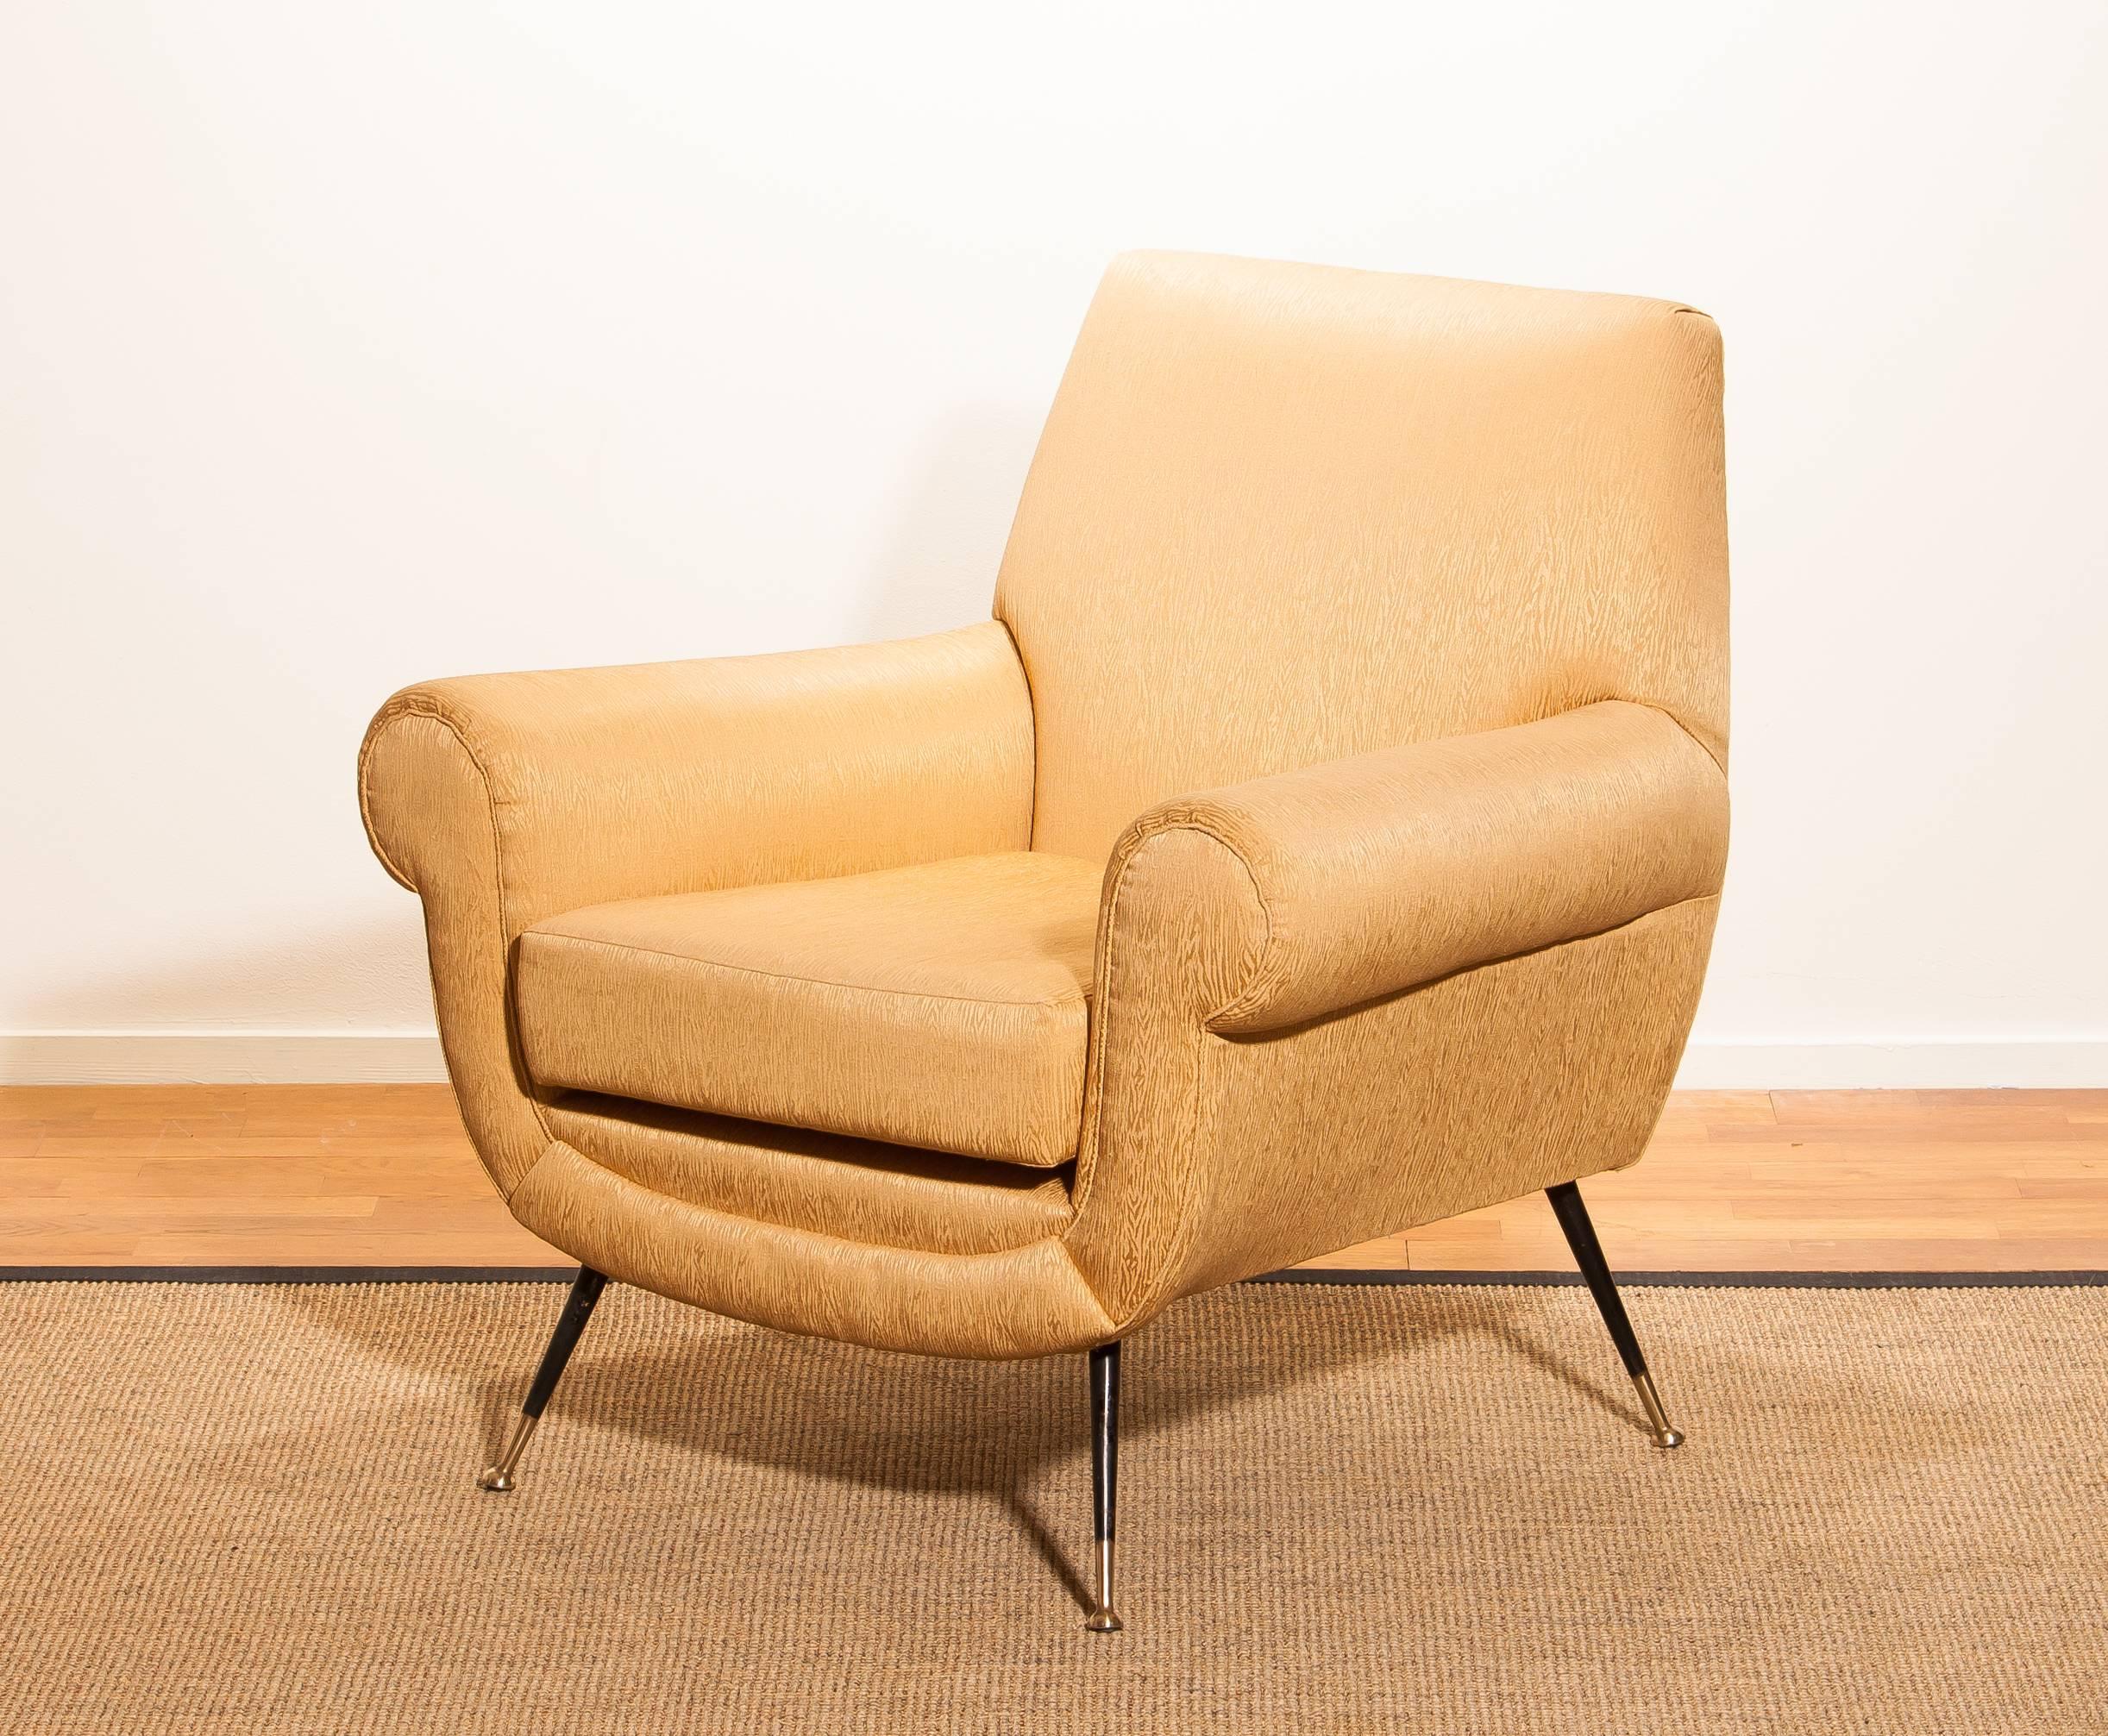 Beautiful and excellent Italian midcentury lounge chair of the 1950s. With the original brass stiletto legs and golden jacquard fabric (later period), all in perfect condition and with an extremely comfortable seat.
Designed by Gigi Radice for